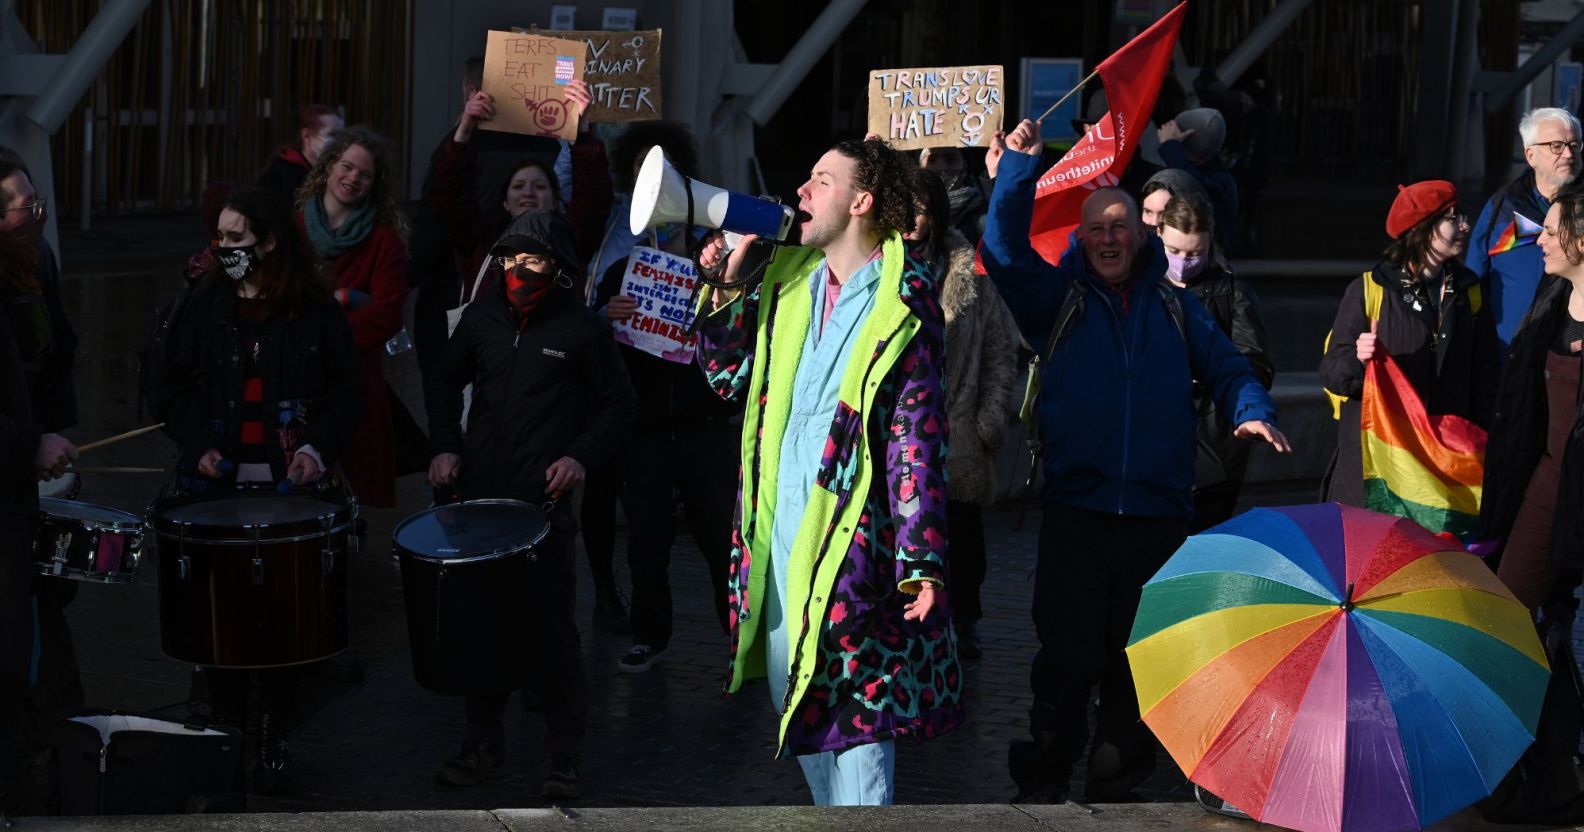 Cabaret Against The Hate Speech join pro-trans allies outside Scottish Parliament